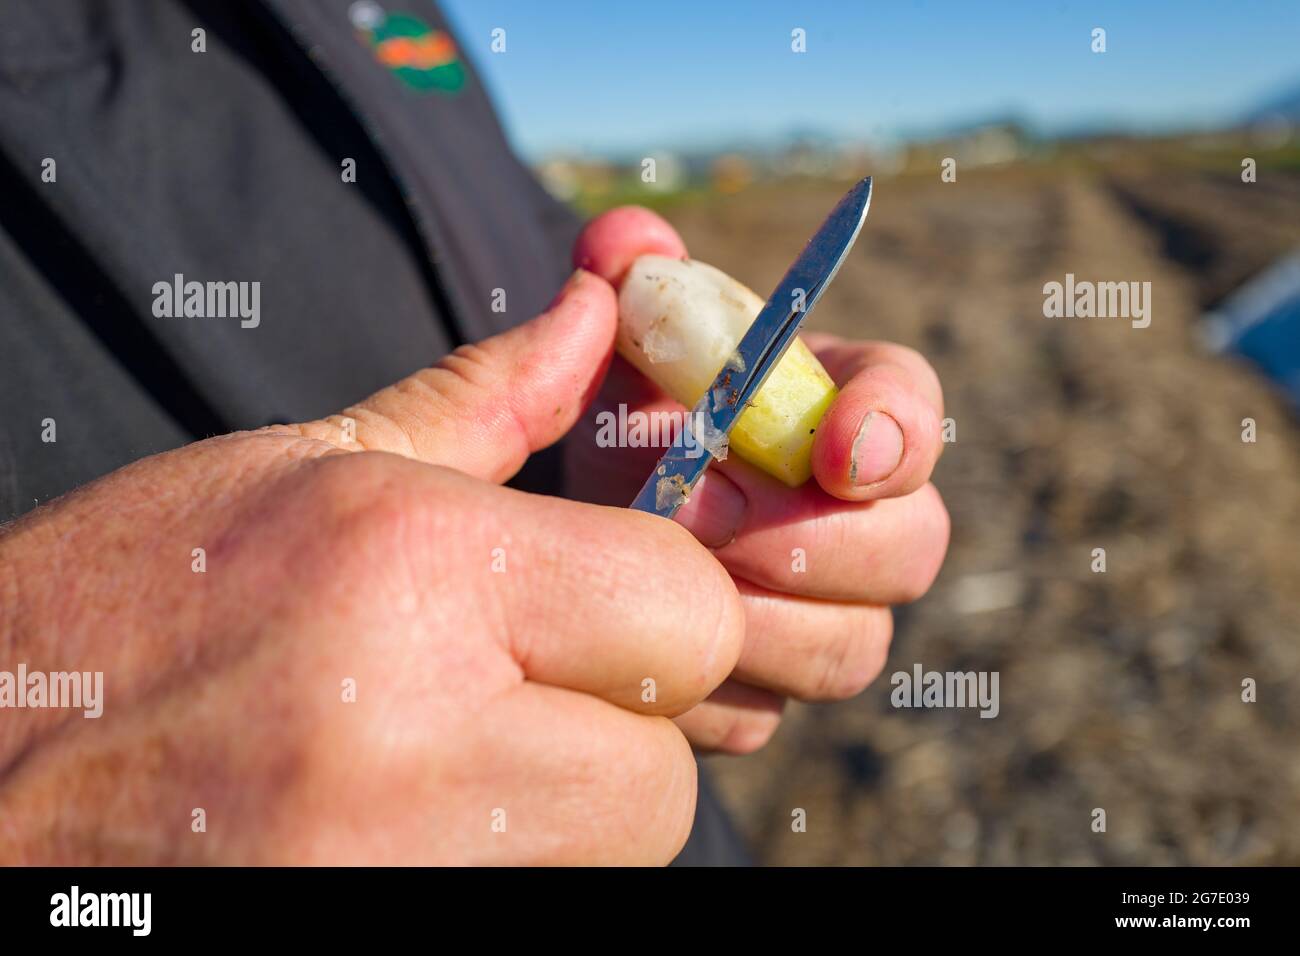 Human hands of a person using a knife to carve a vegetable at CoCo San Sustainable Farm, an experimental farm which uses recycled water to grow plants for local schools in Martinez, California, January 24, 2019. () Stock Photo